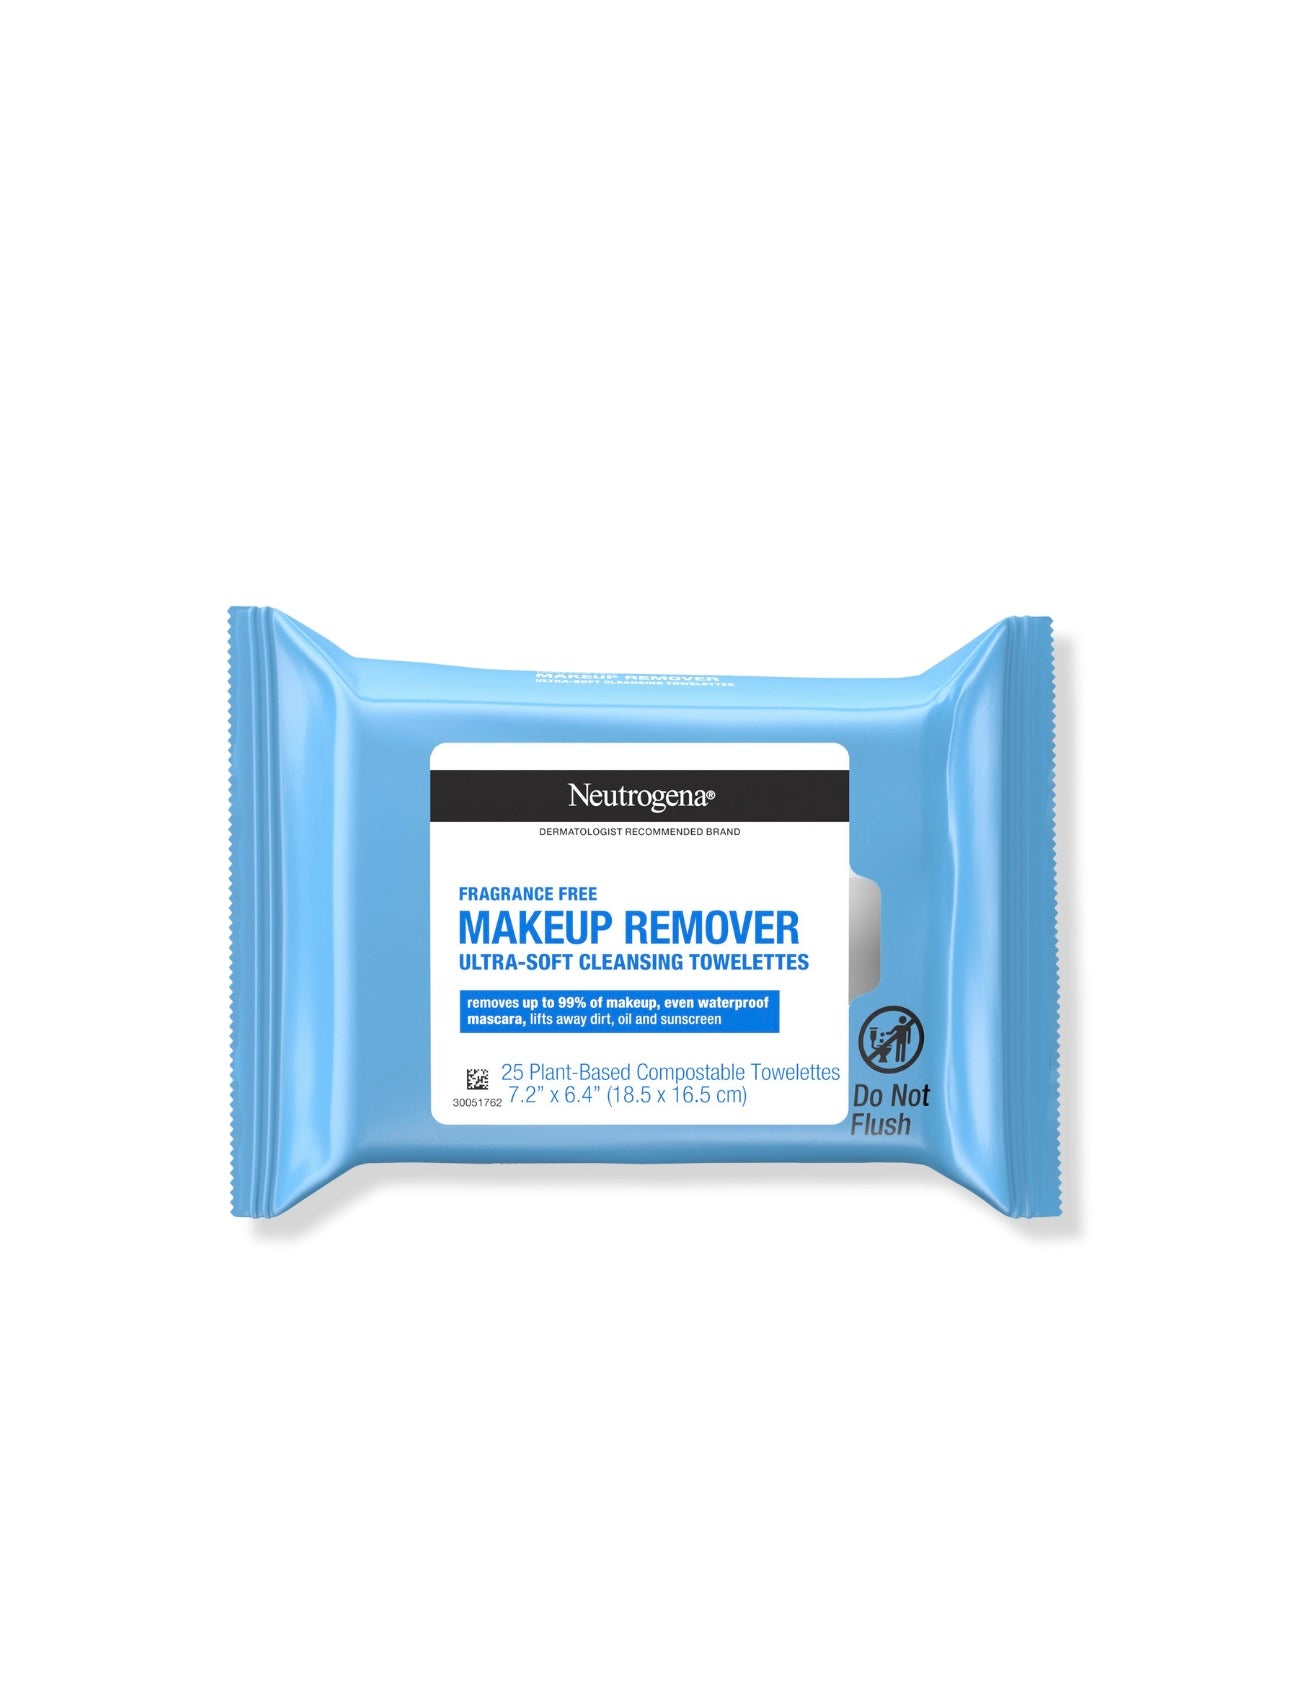 Neutrogena Makeup Remover Cleansing Face Tissues